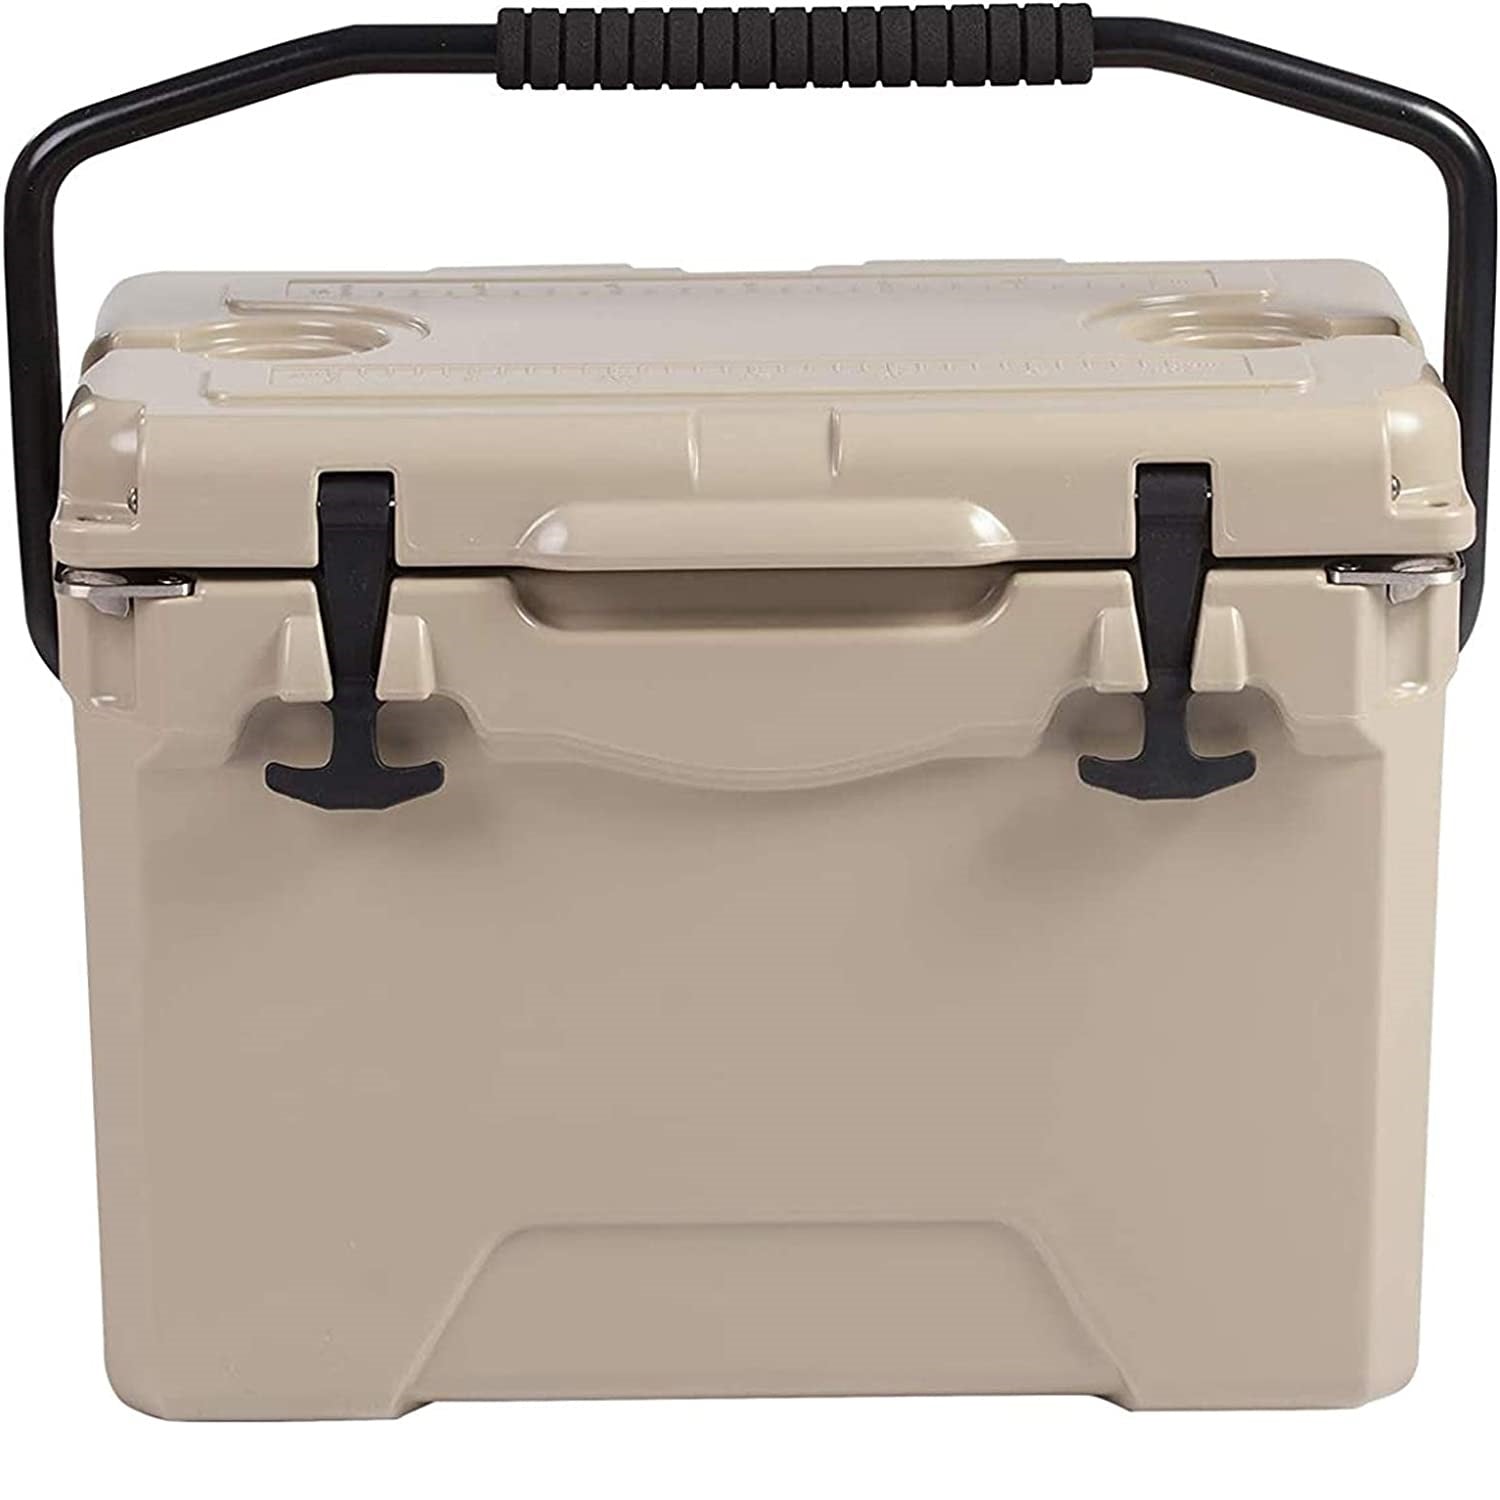 Portable Coolers, Keep Ice Up to 5 Days, Rotomolded Insulation Ice Chest for Camping, Fishing, Hunting, BBQs & Outdoor Activities, 25QT